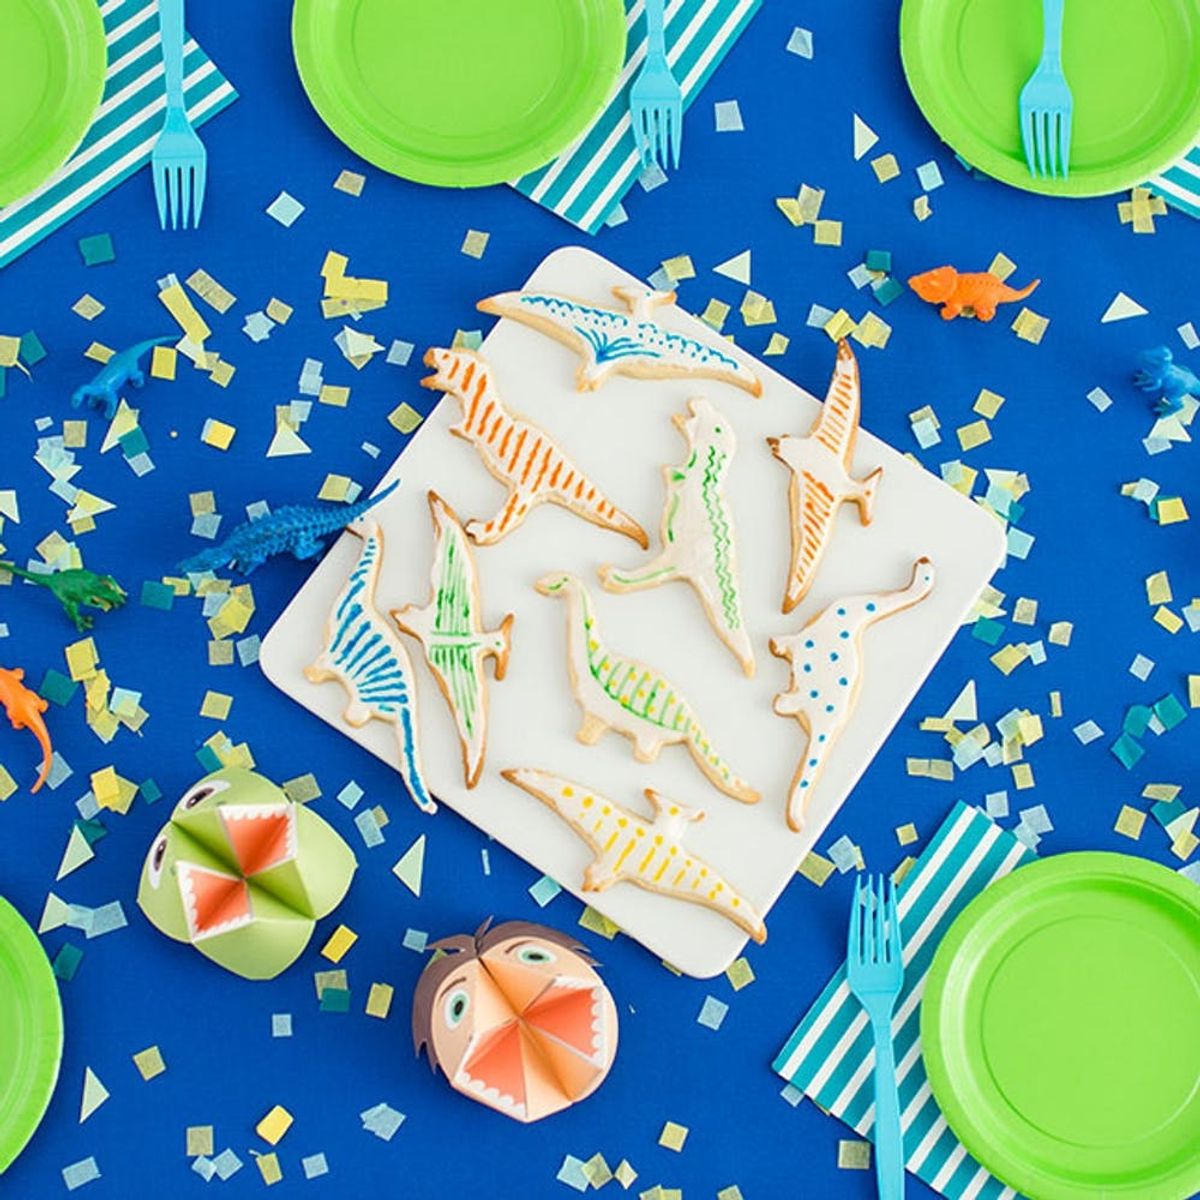 How to Make Your Child a Good Dinosaur-Themed Birthday Party